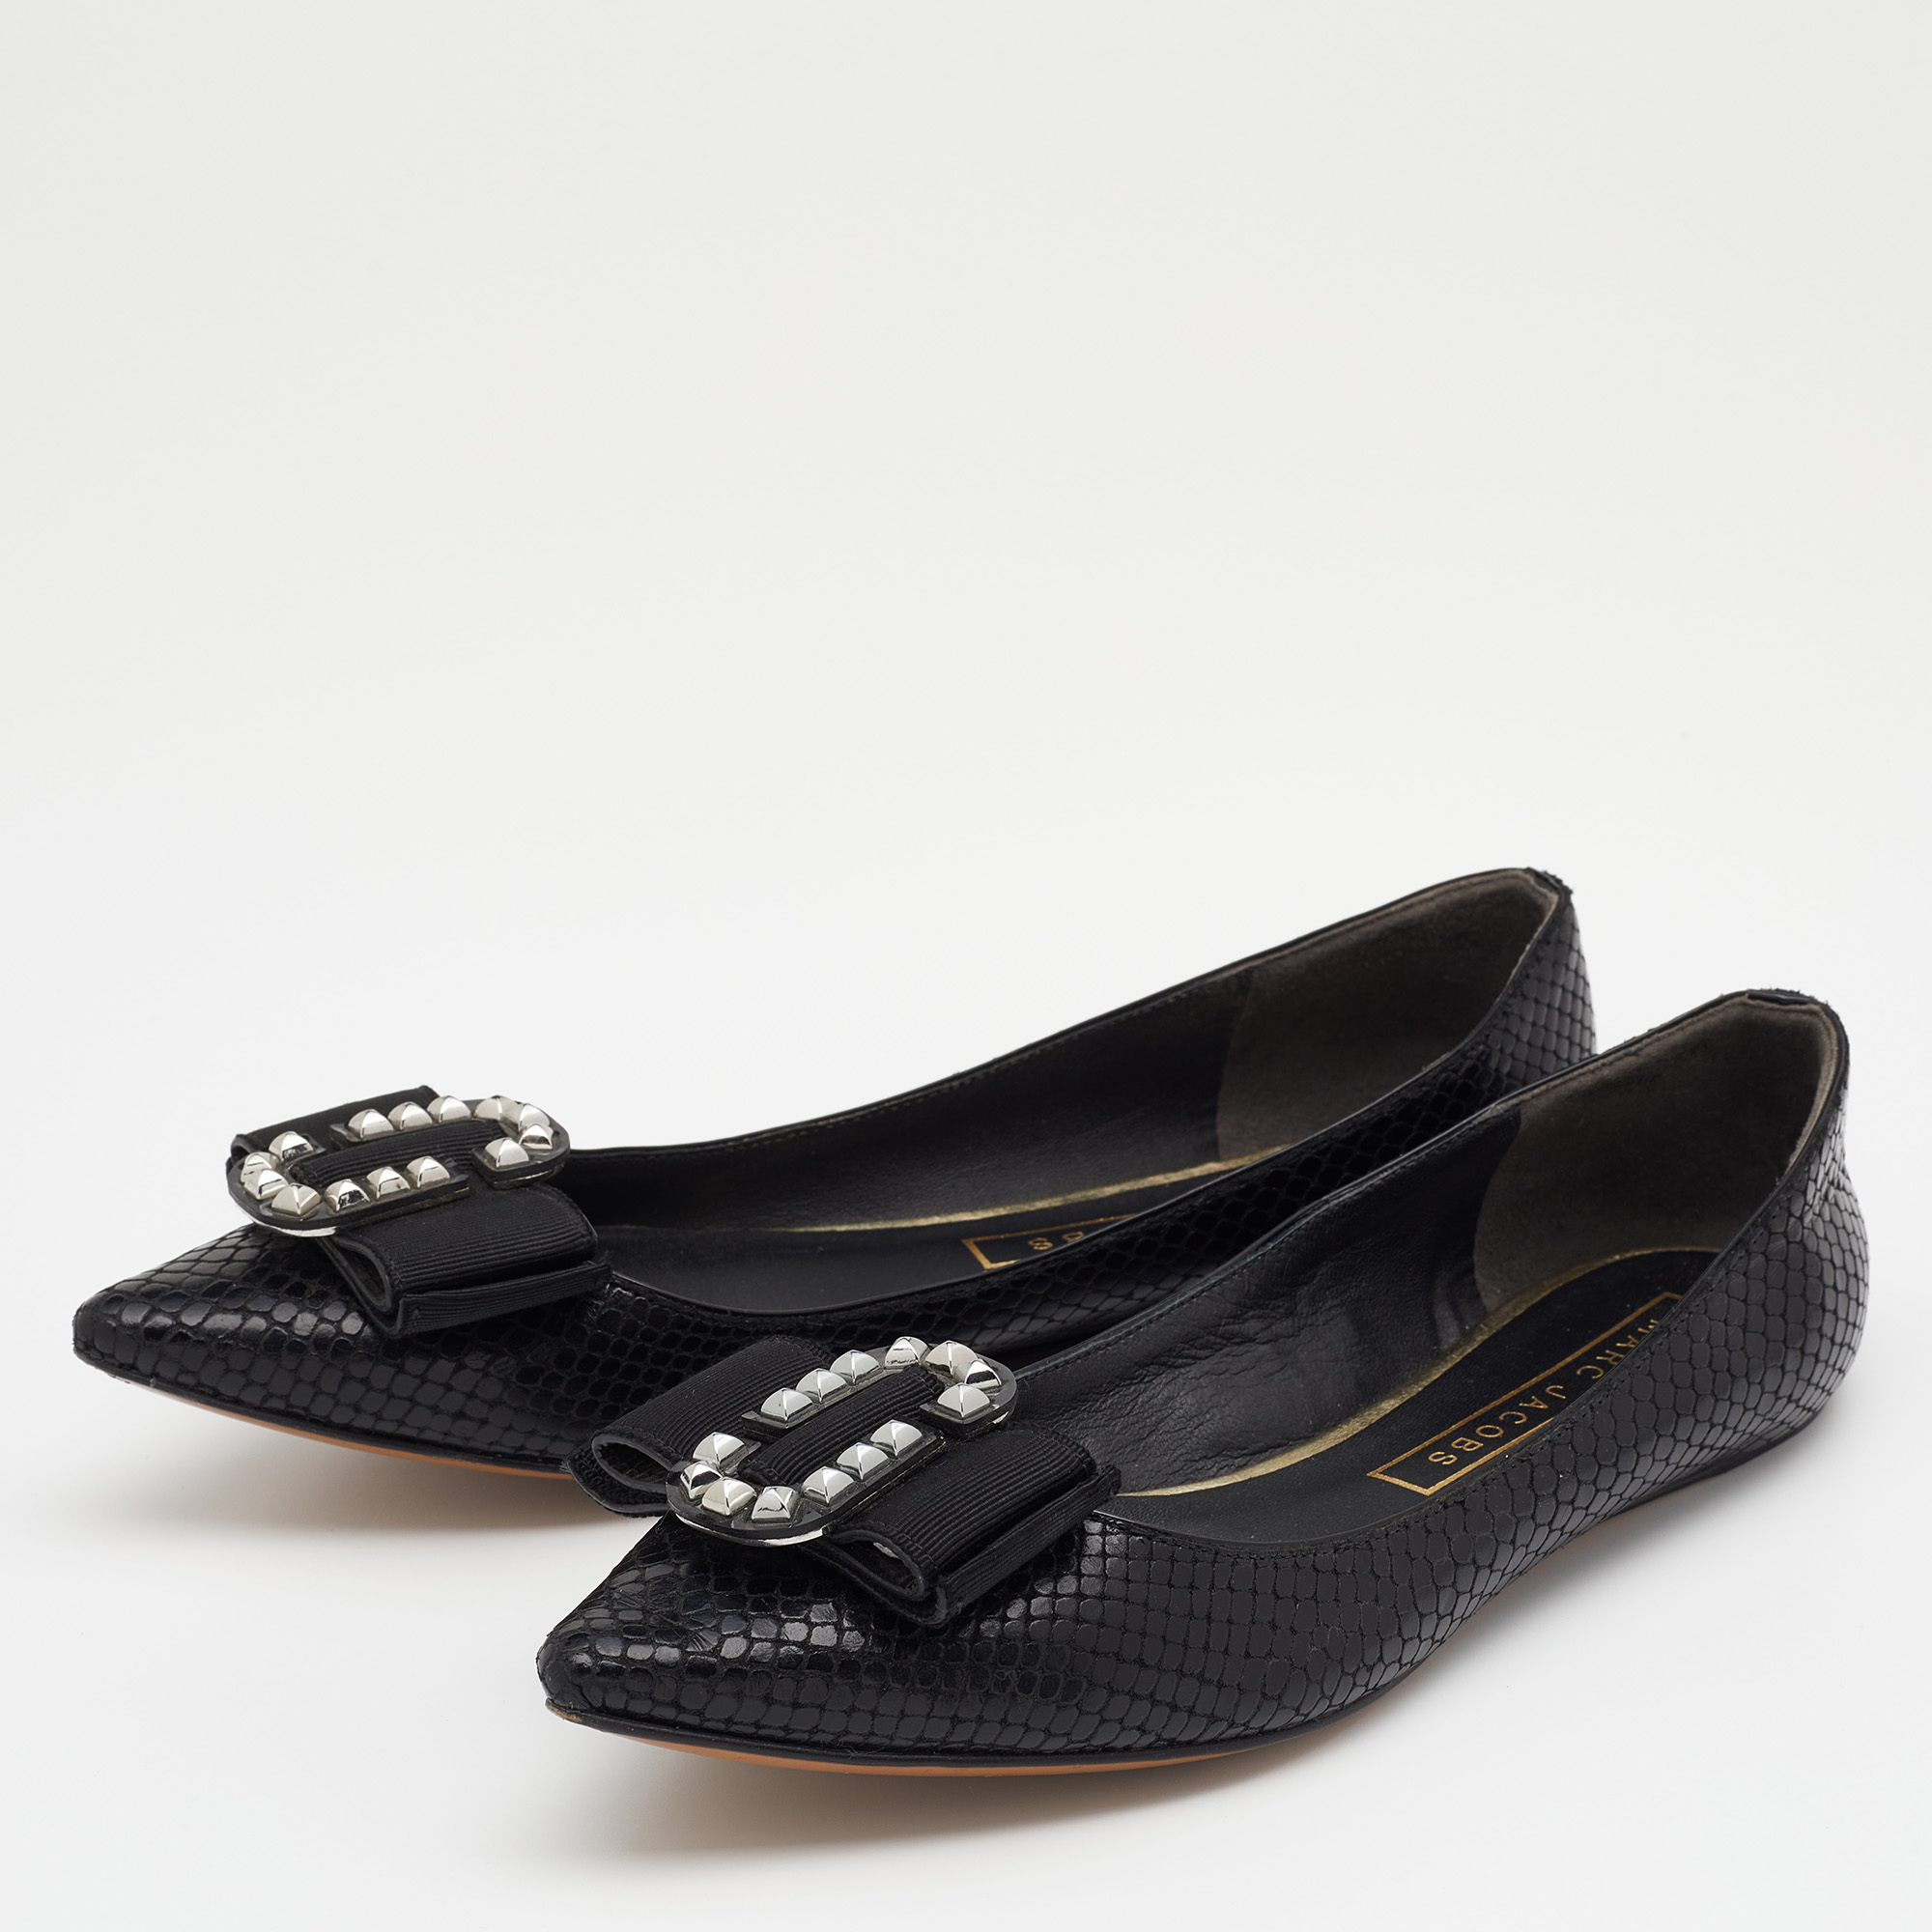 

Marc Jacobs Black Snakeskin Embossed Leather Pointed Toe Ballet Flats Size